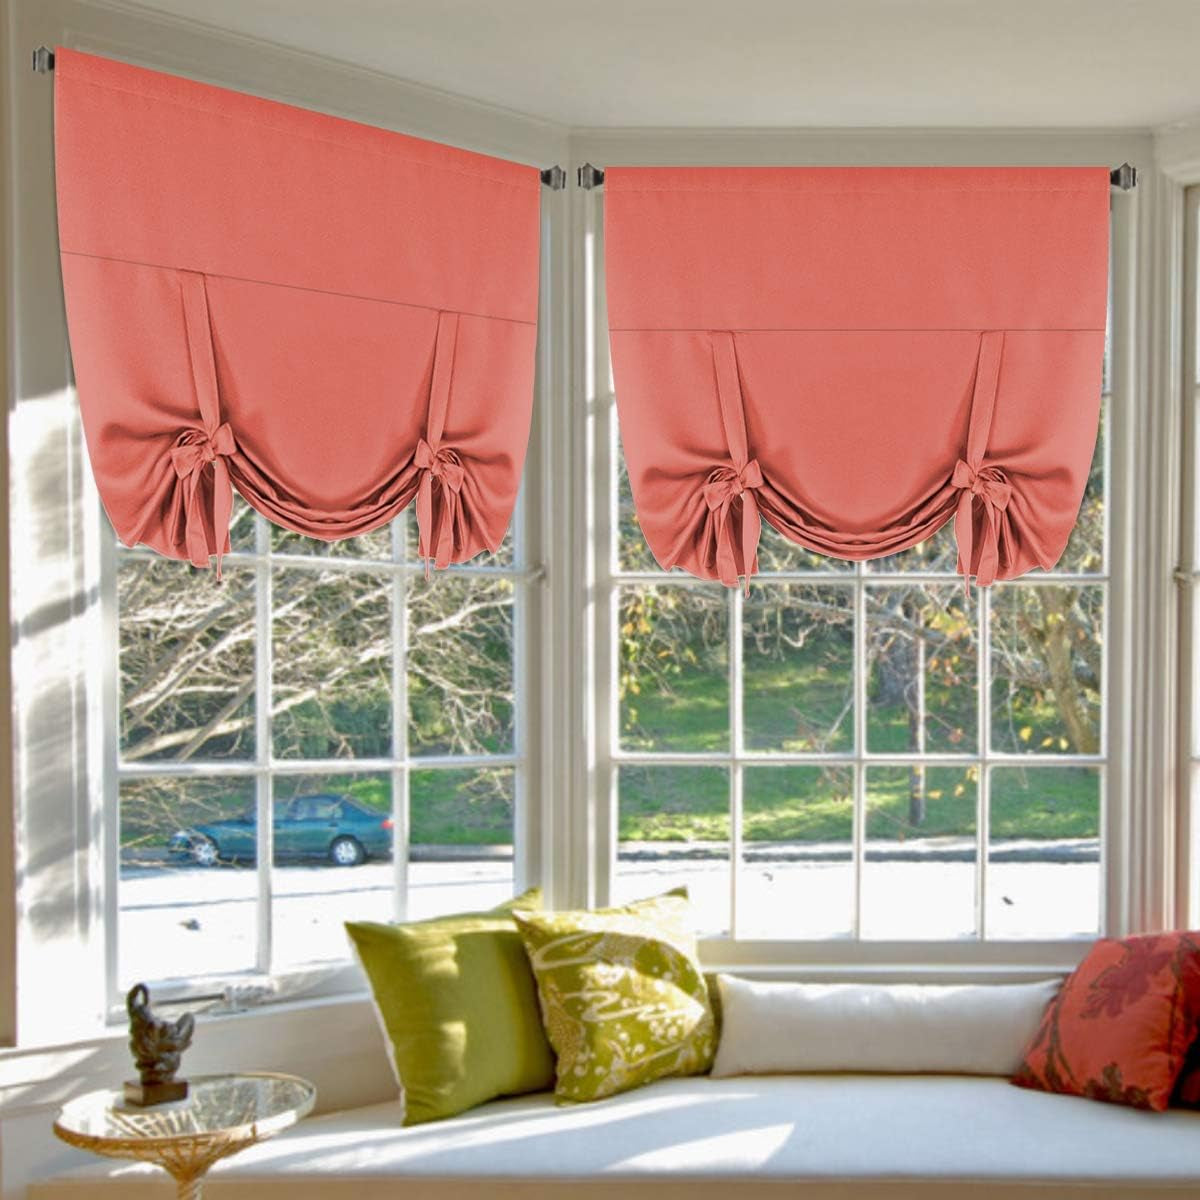 H.VERSAILTEX Tie up Curtain Thermal Insulated Room Darkening Rod Pocket Valance for Bedroom (Coral, 1 Panel, 42 Inches W X 63 Inches L)  H.VERSAILTEX Coral W42" X L63" 2-Pack 